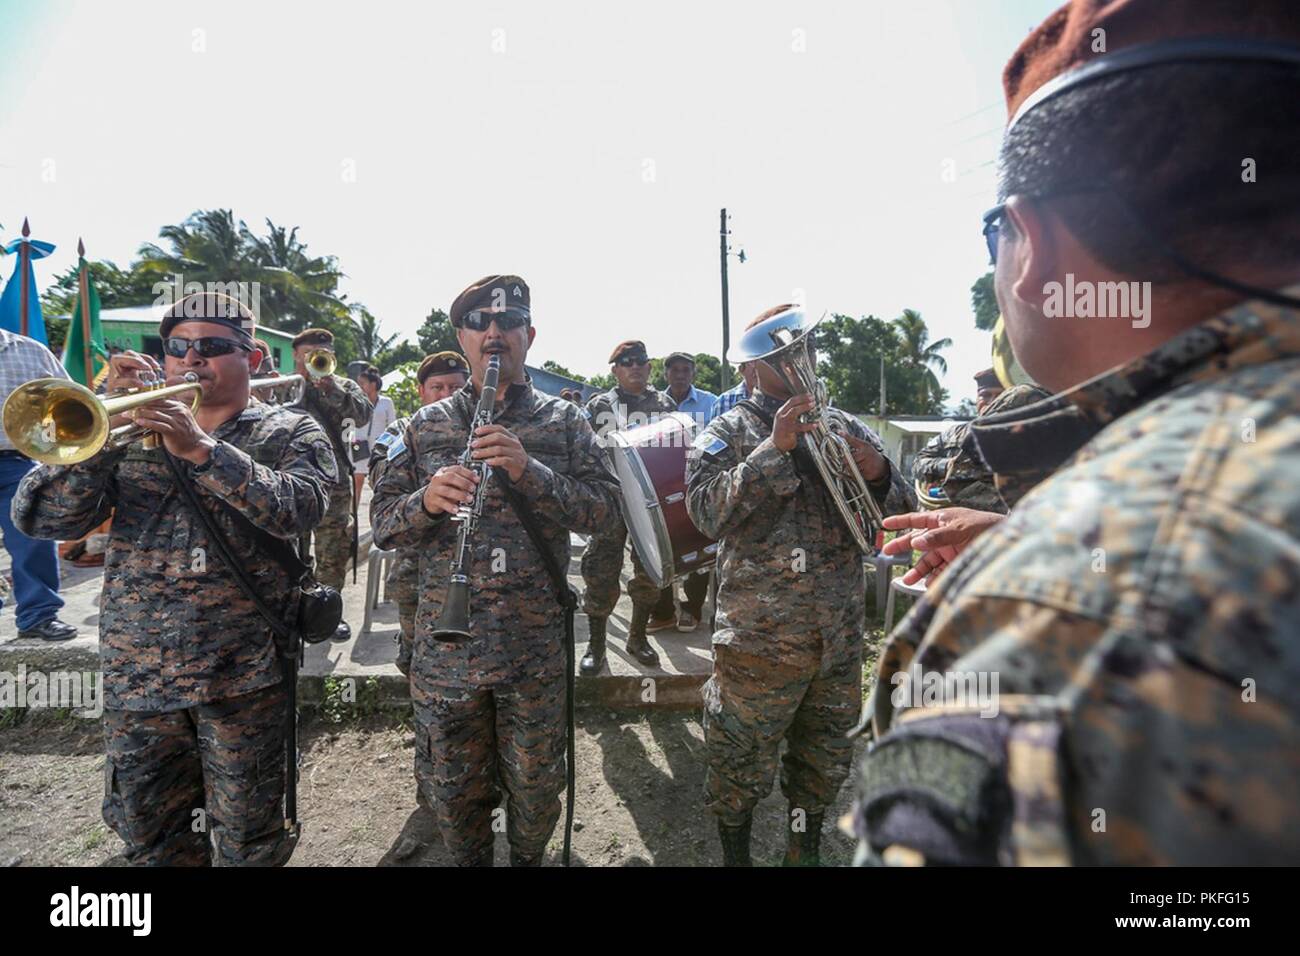 A Guatemalan Army band plays the U.S. national anthem before the ribbon cutting and transfer of keys at a construction site where Marines with Special Purpose Marine Air-Ground Task Force - Southern Command worked together with Guatemalan engineers in La Paz, Guatemala, Aug. 6, 2018 . The Marines and sailors of SPMAGTF-SC are conducting security cooperation training and engineering projects alongside partner nation military forces in Central and South America. The unit is also on standby to provide humanitarian assistance and disaster relief in the event of a hurricane or other emergency in th Stock Photo